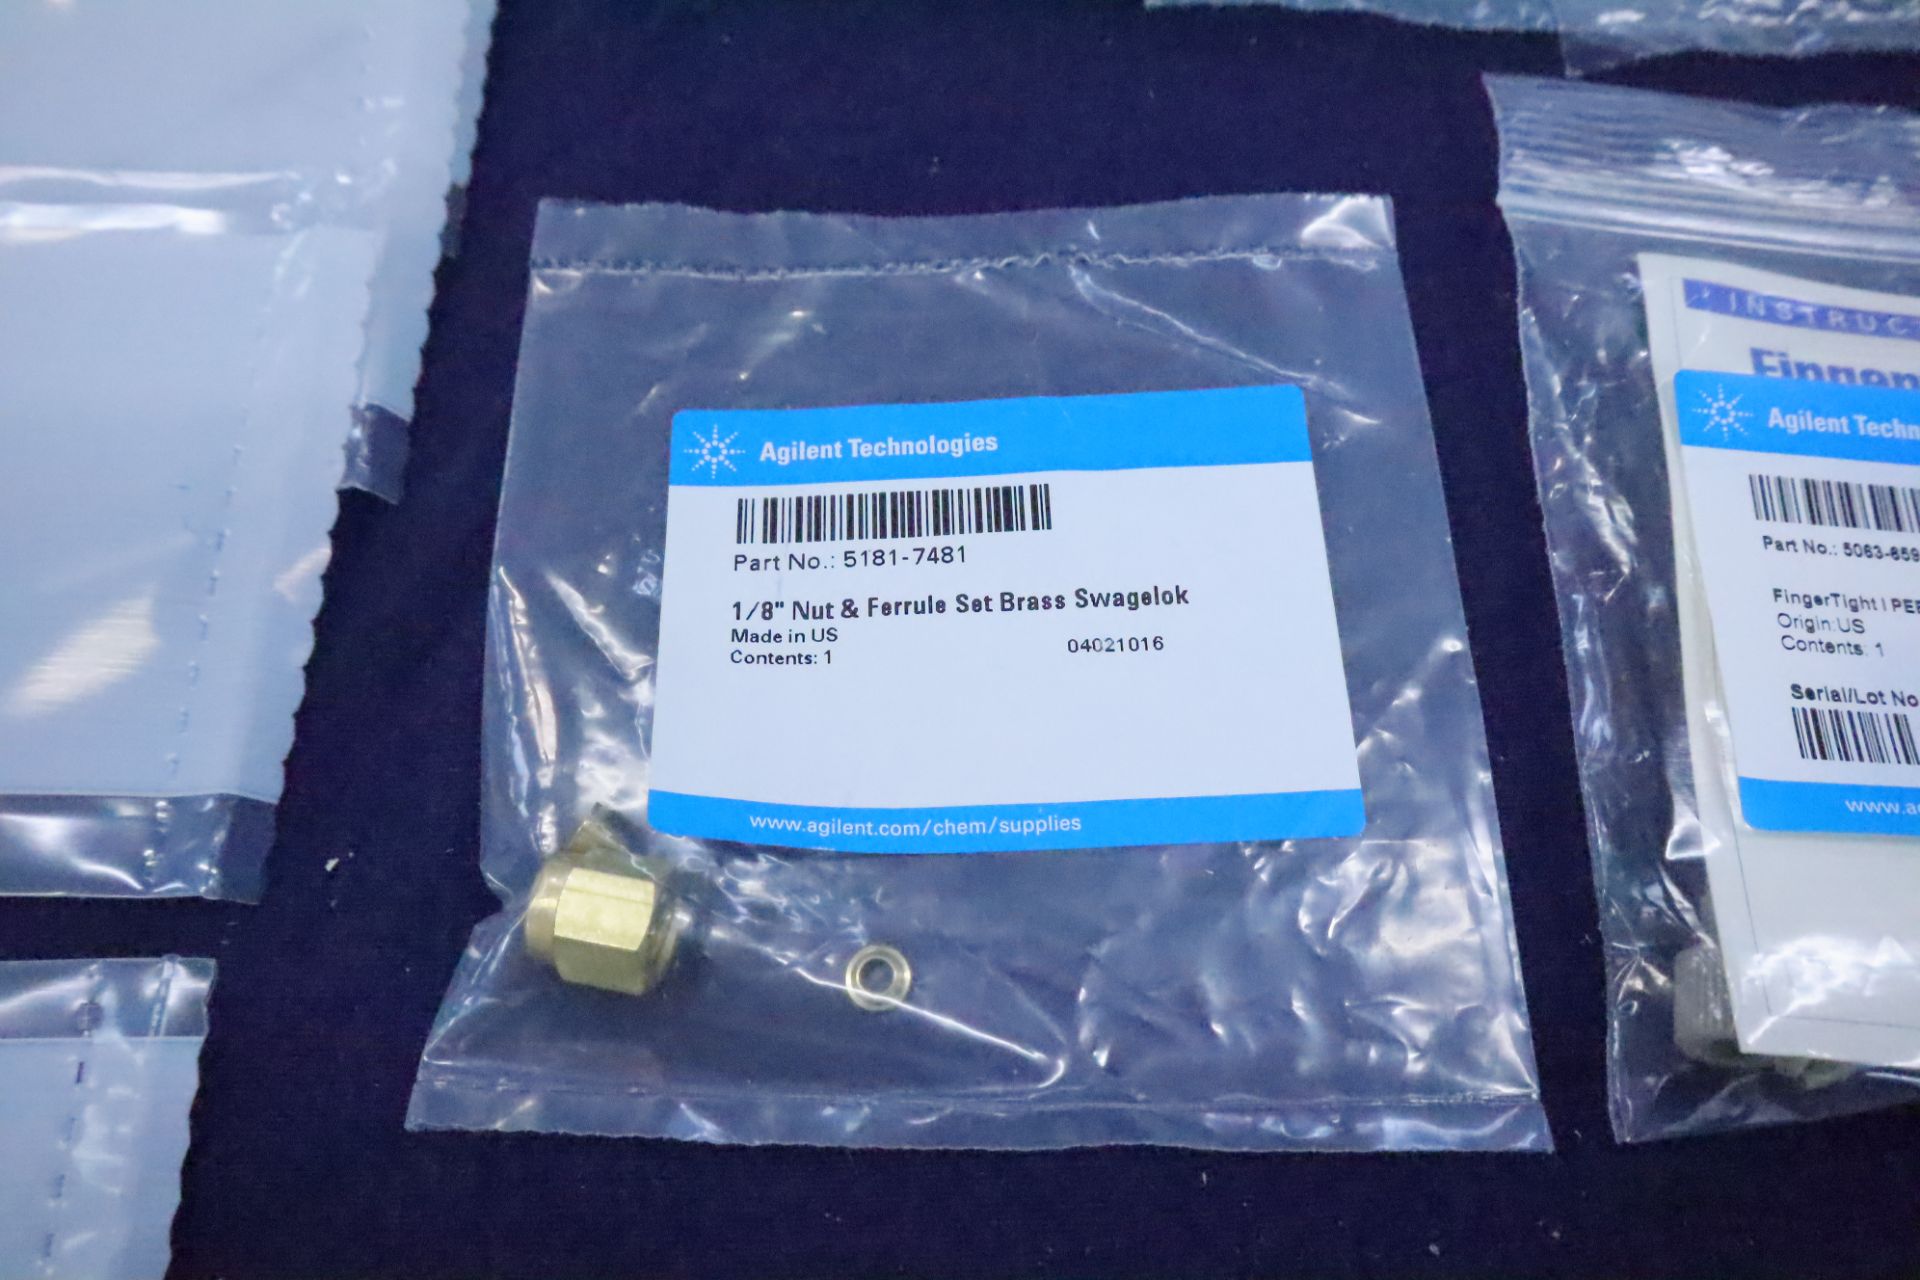 UPDATED PHOTOS Agilent Technologies OEM Replacement Parts and tool kits for LC/MS Machines - Image 33 of 37